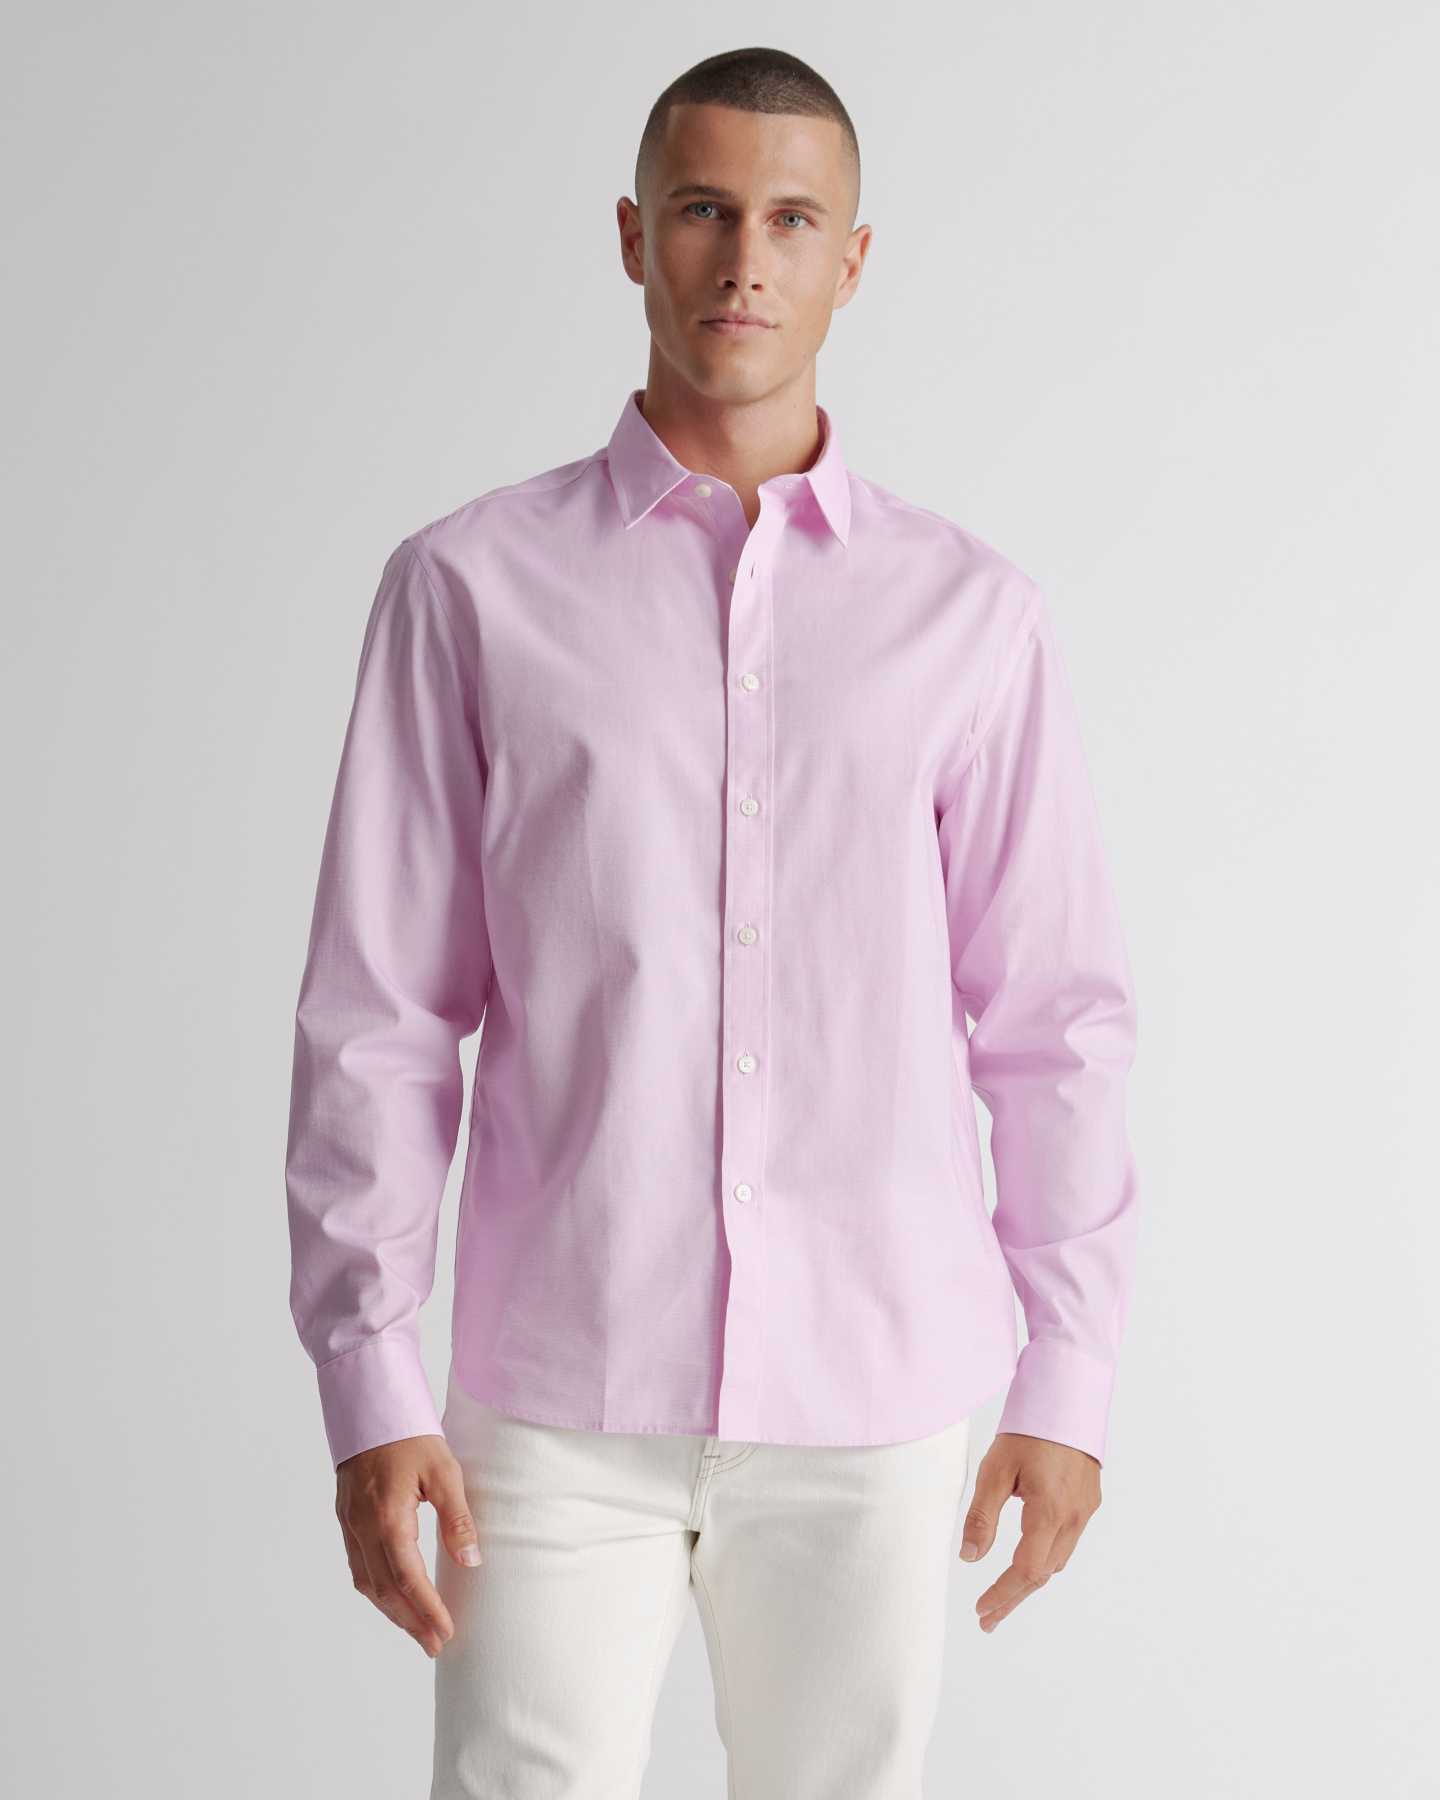 The Untucked Dress Shirt - Pink FilCoupe - 9